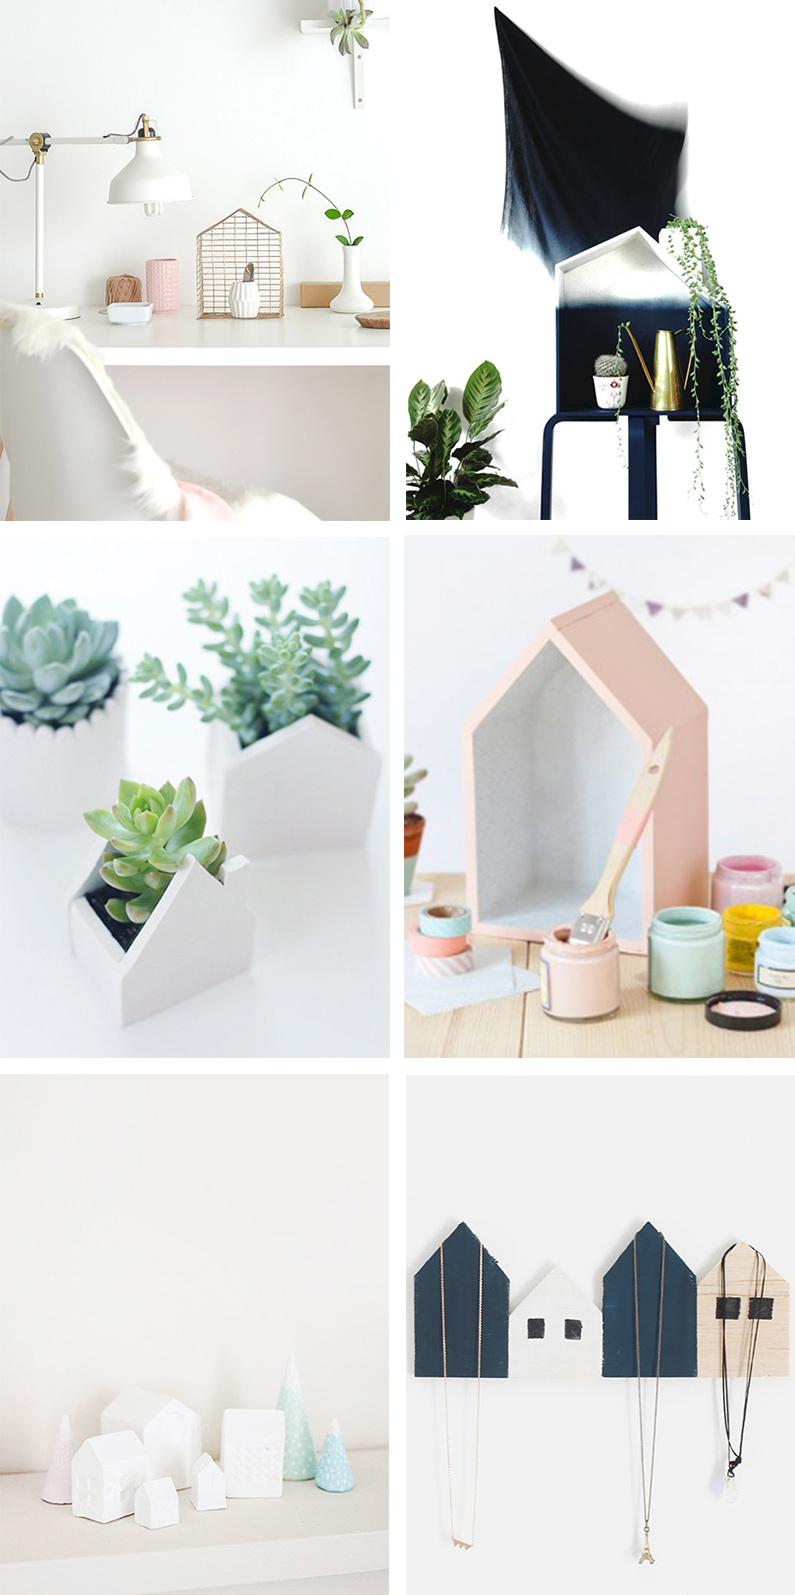 Why Don’t You Make…House Inspired Decor